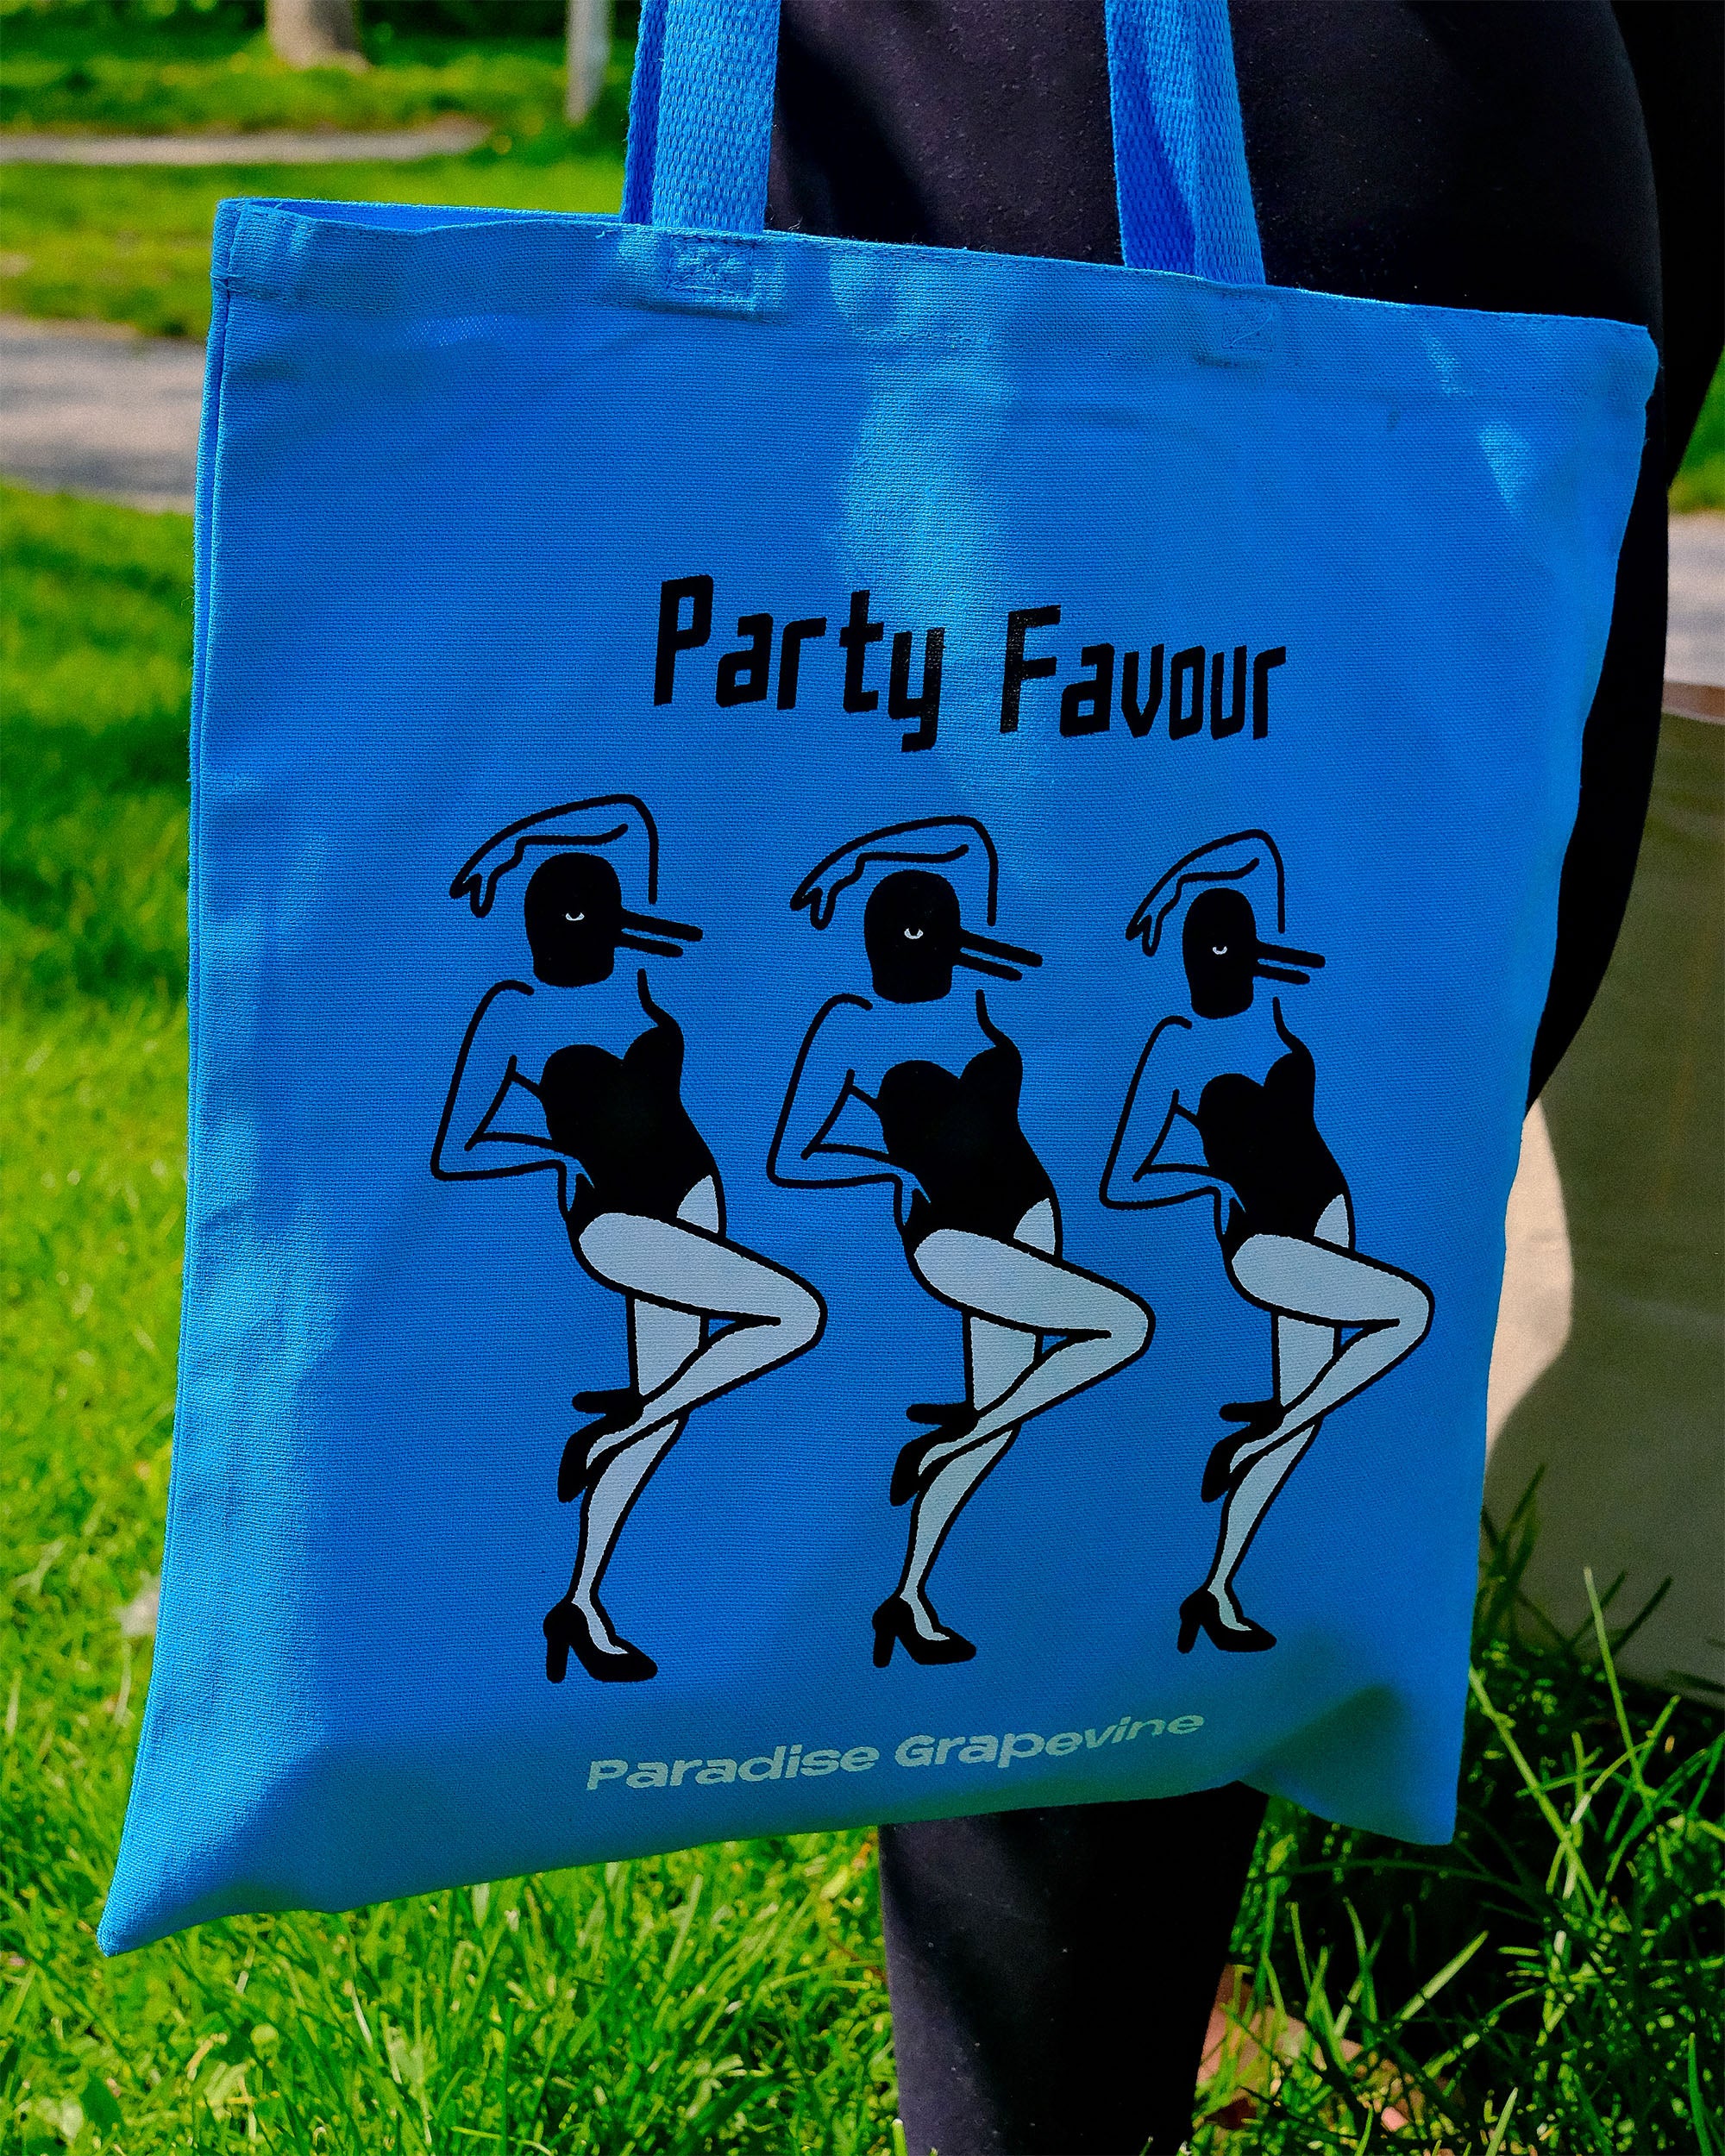 Party Favour Teal Tote